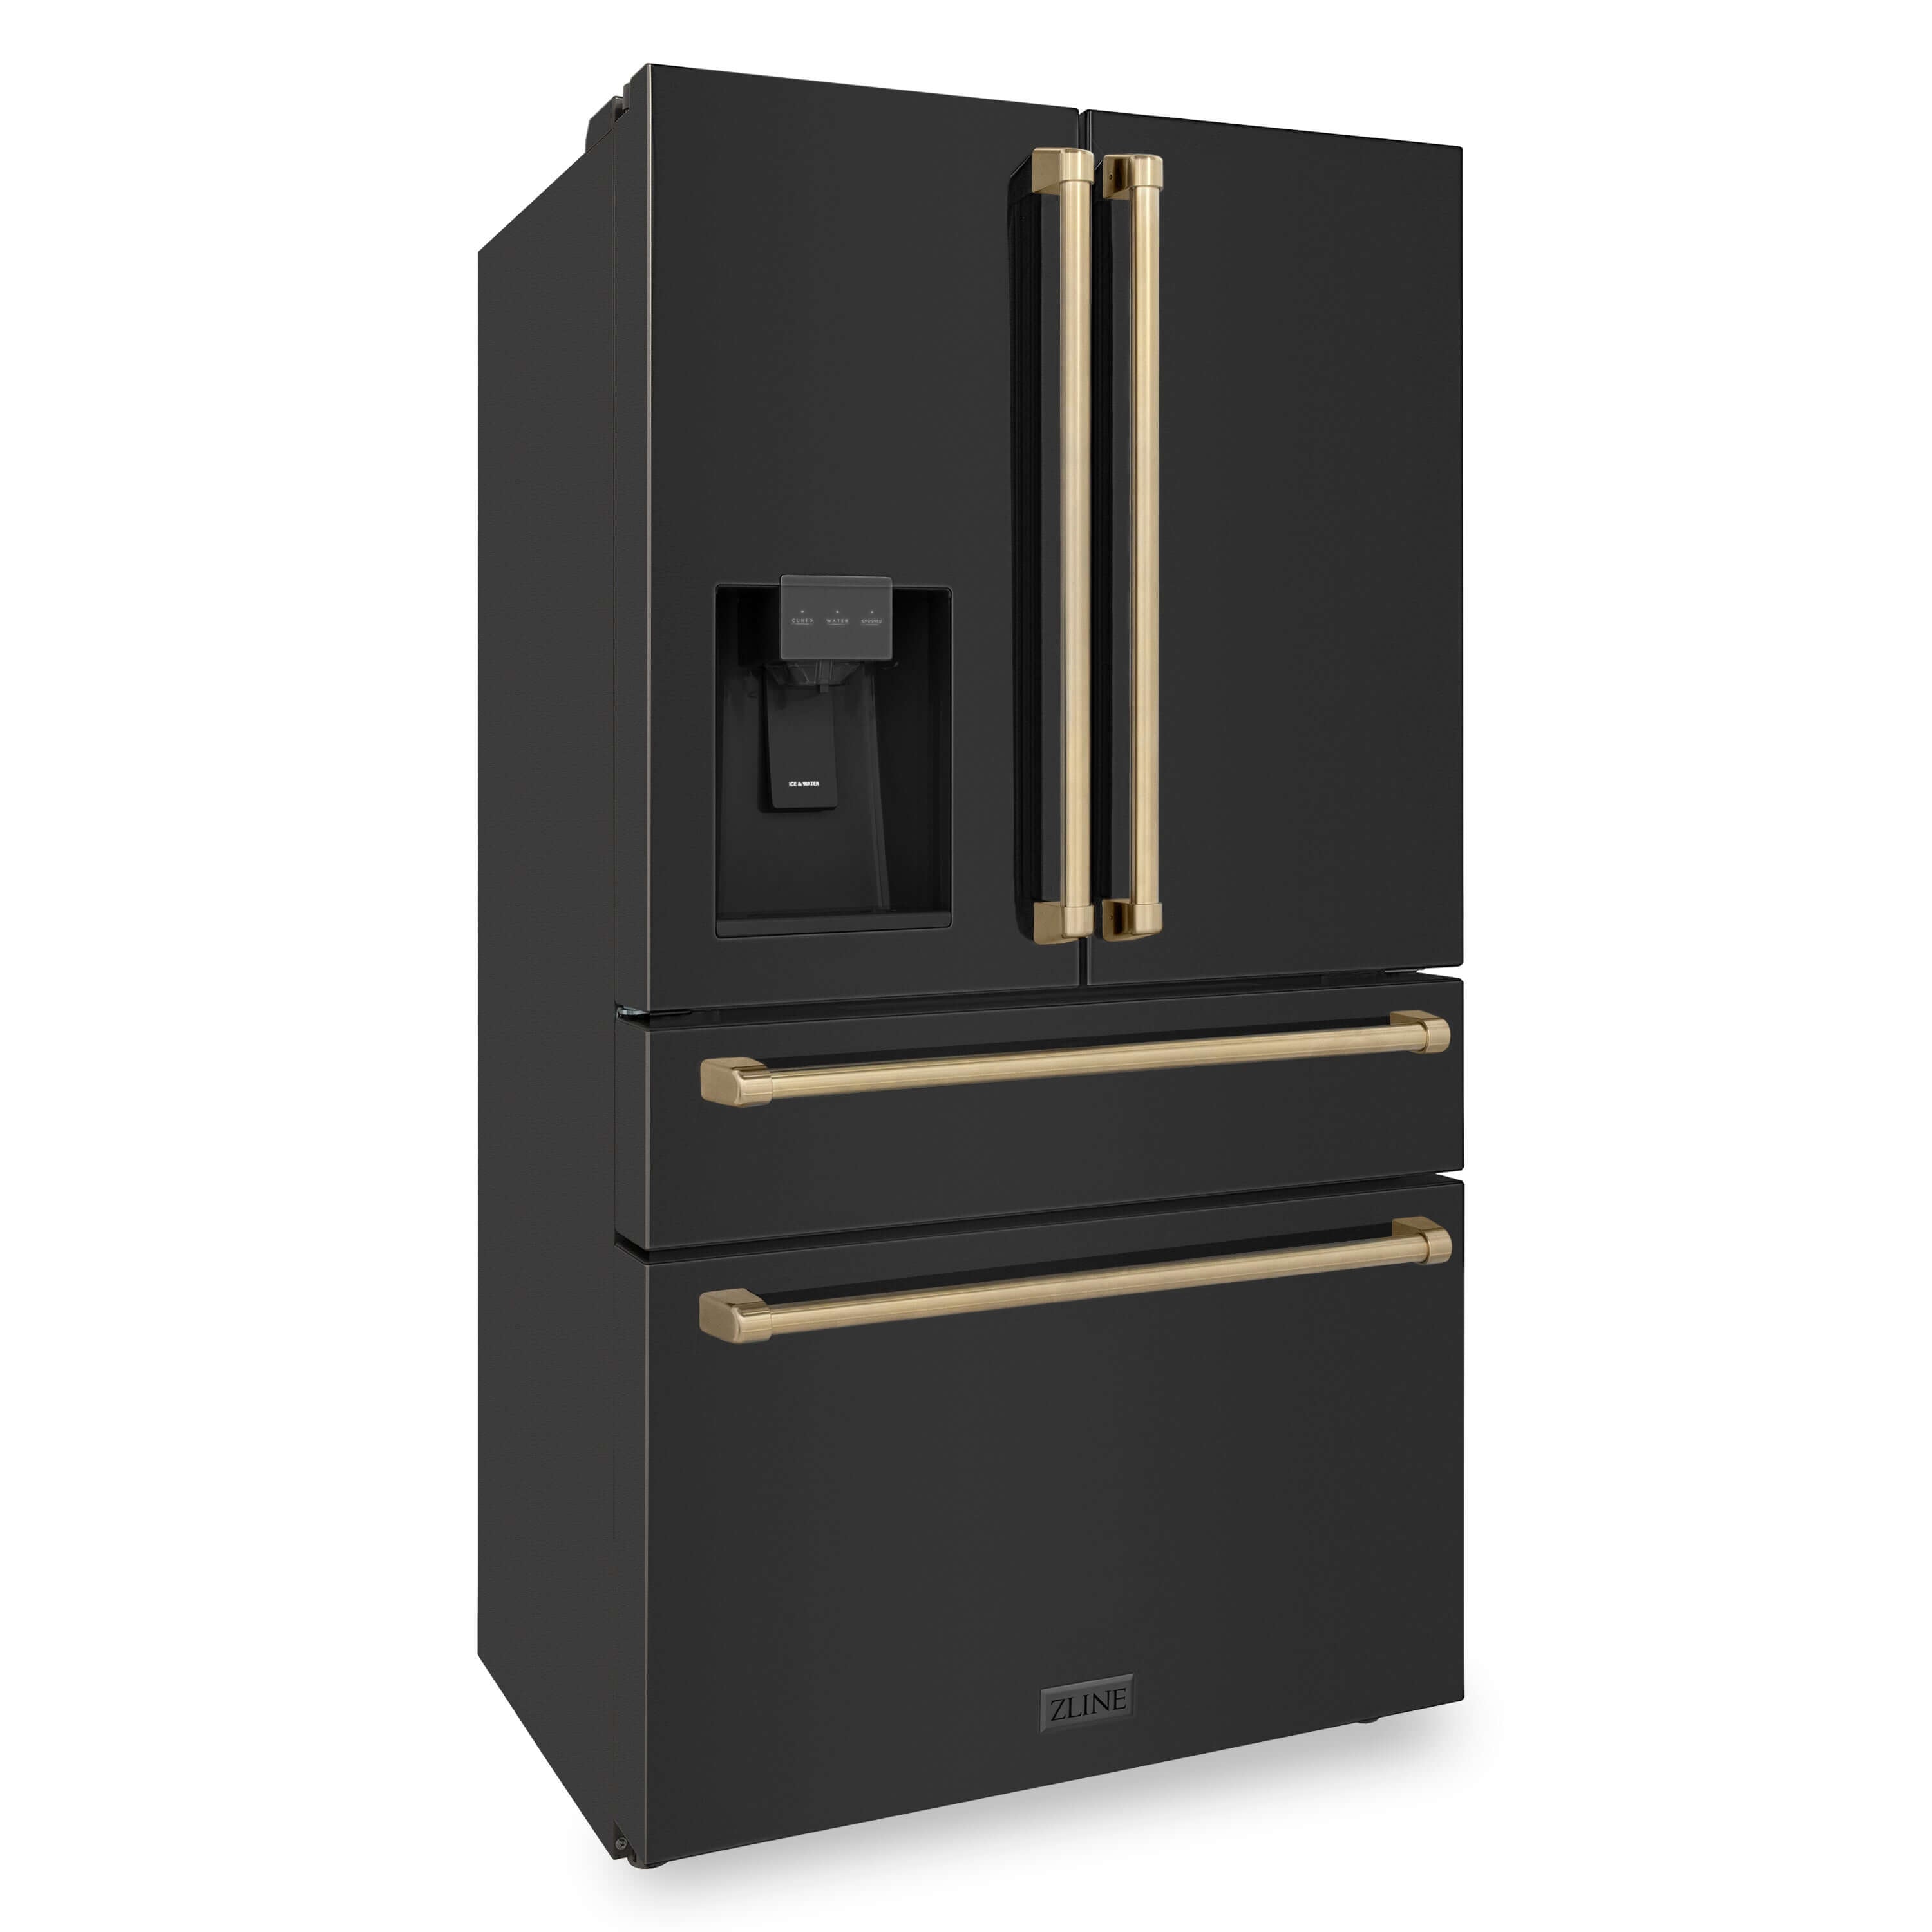 ZLINE Autograph Edition 36 in. 21.6 cu. ft Freestanding French Door Refrigerator with Water and Ice Dispenser in Fingerprint Resistant Black Stainless Steel with Champagne Bronze Accents (RFMZ-W-36-BS-CB) side, closed.